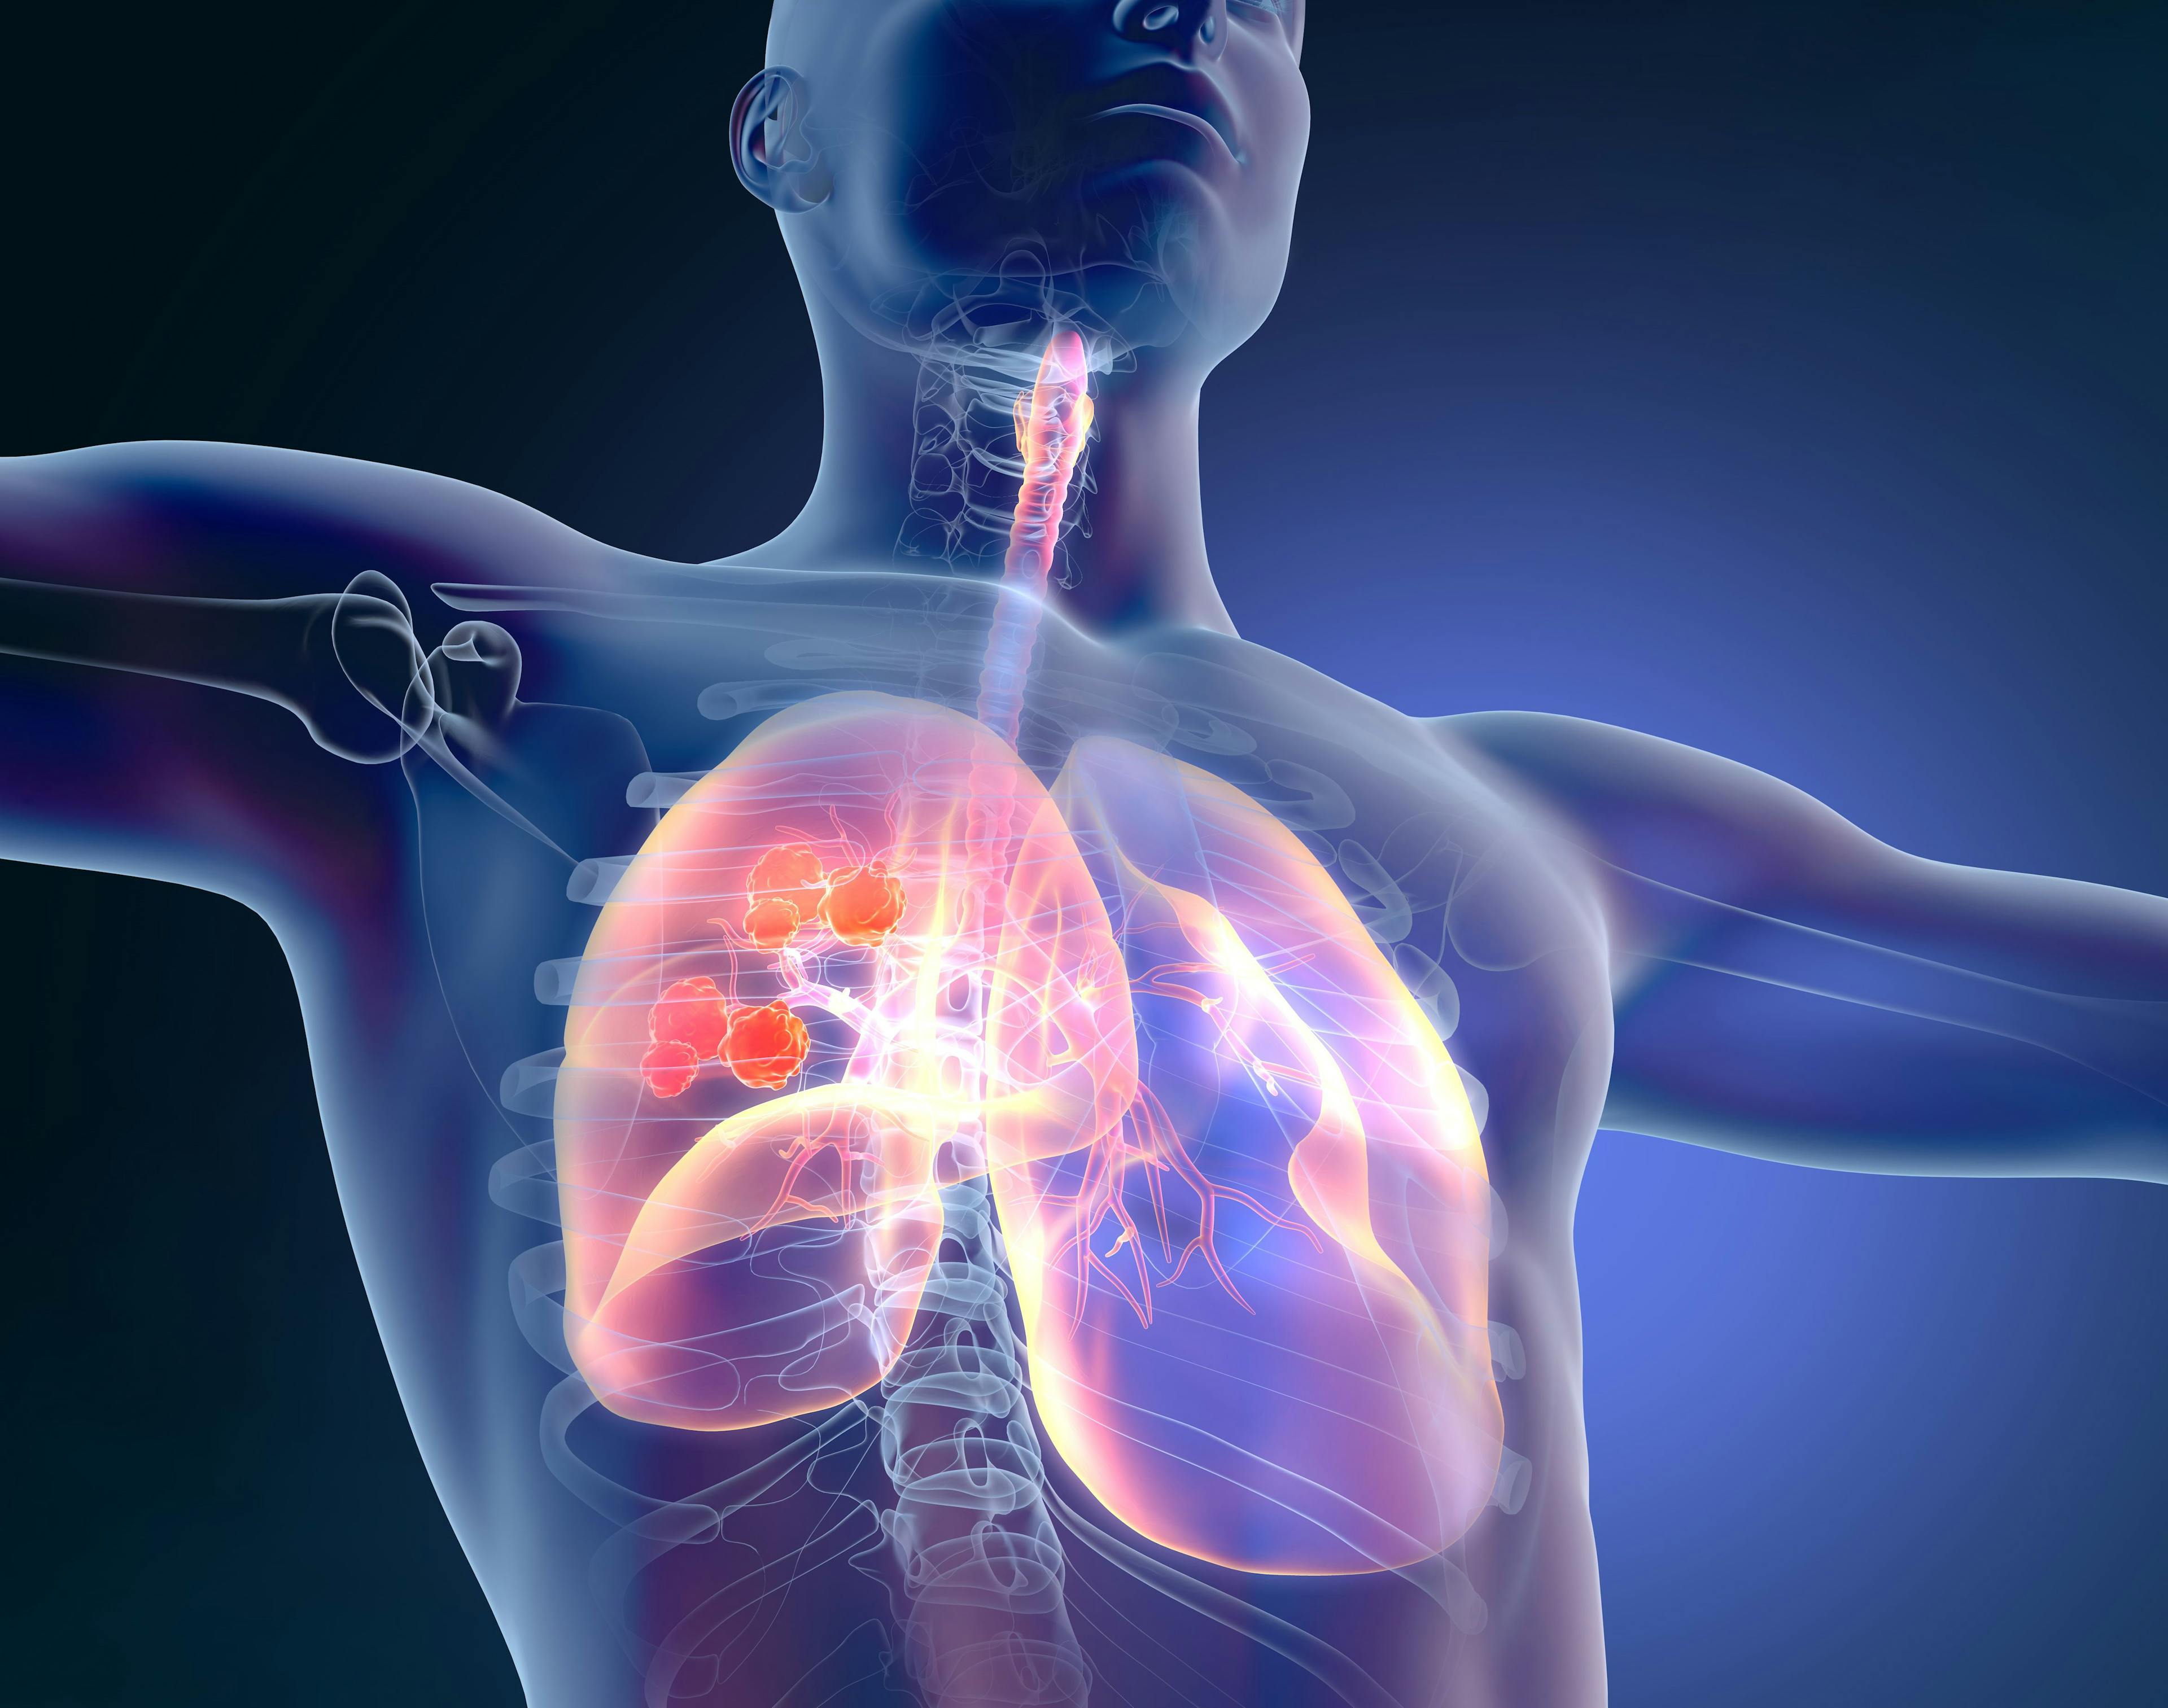 Tislelizumab Plus Chemotherapy Improved Efficacy and Maintained Safety to Treat Squamous NSCLC